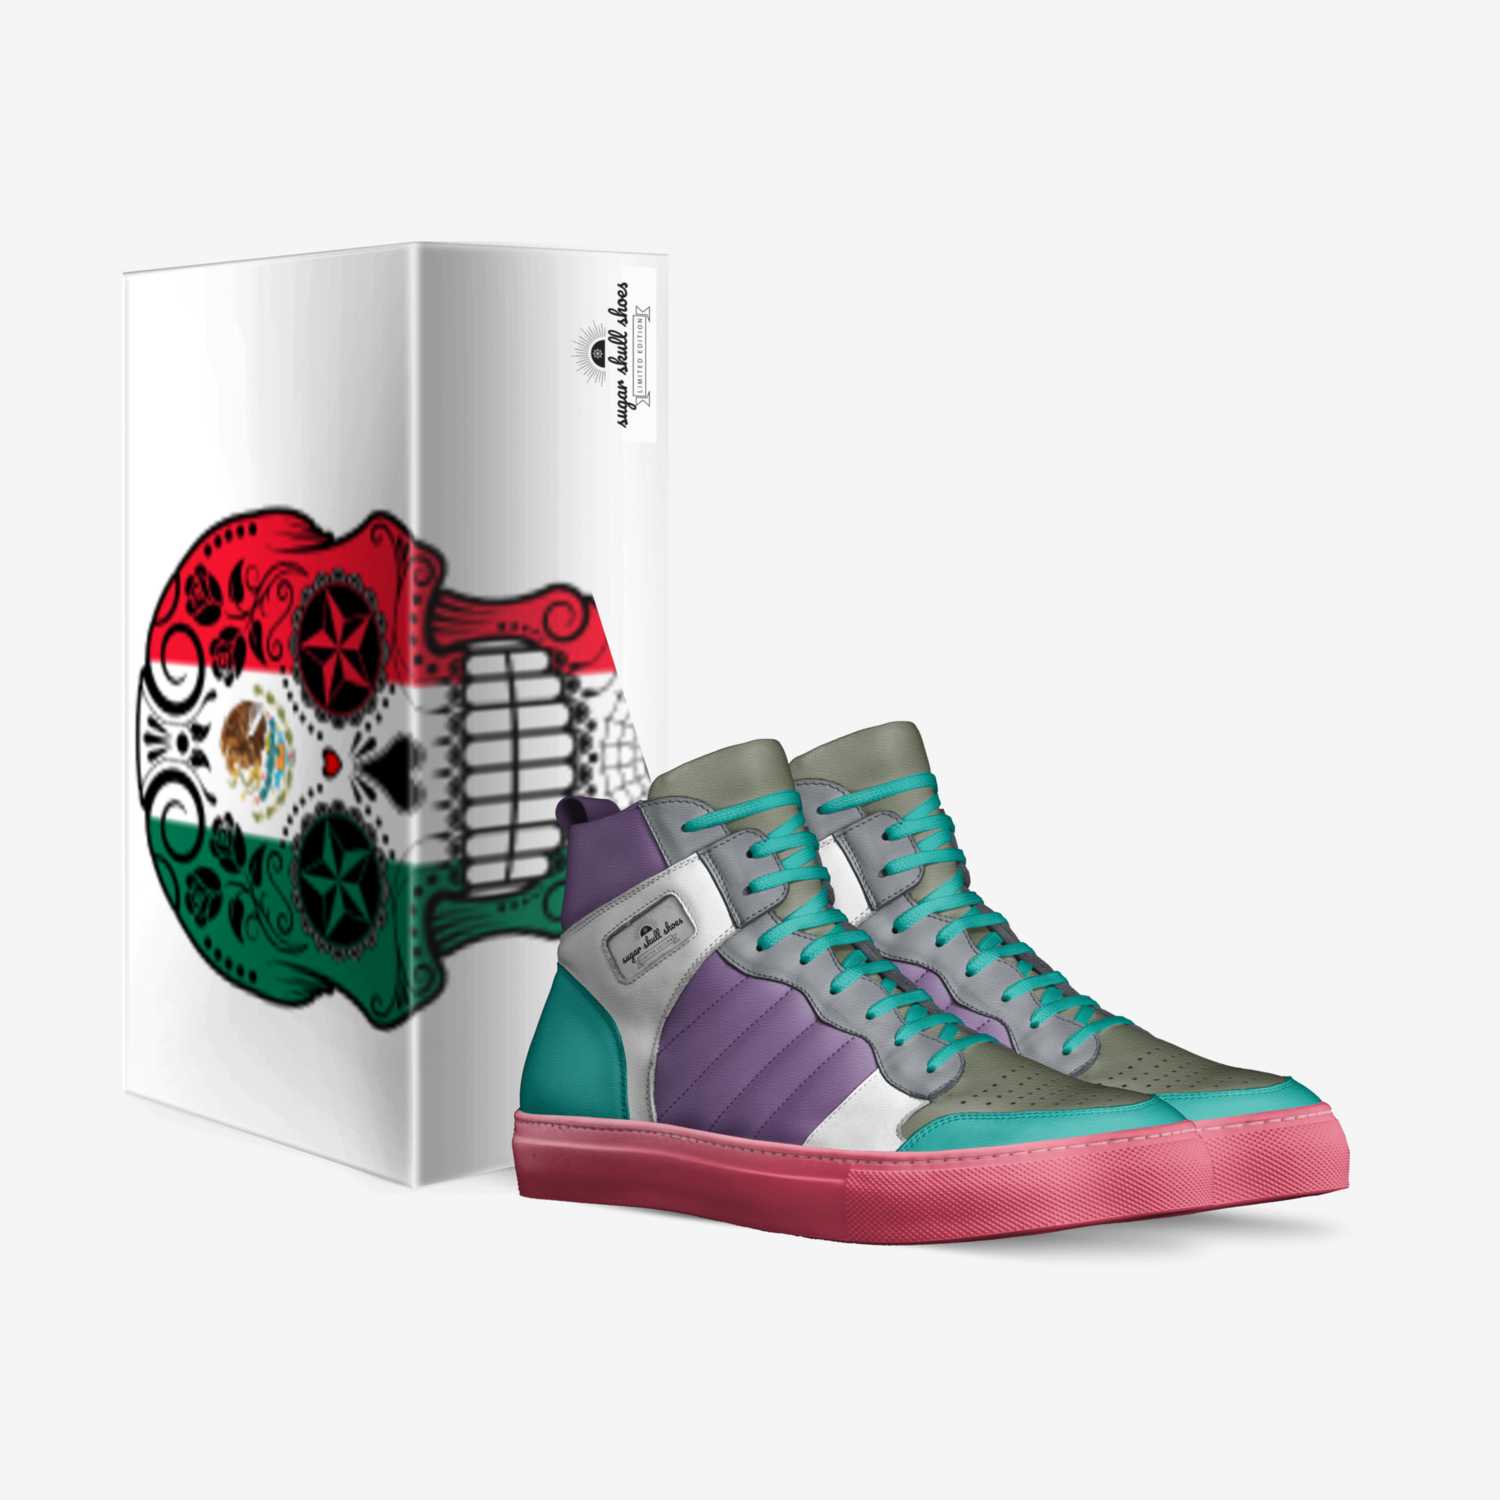 sugar skull shoes custom made in Italy shoes by Parrishracer | Box view